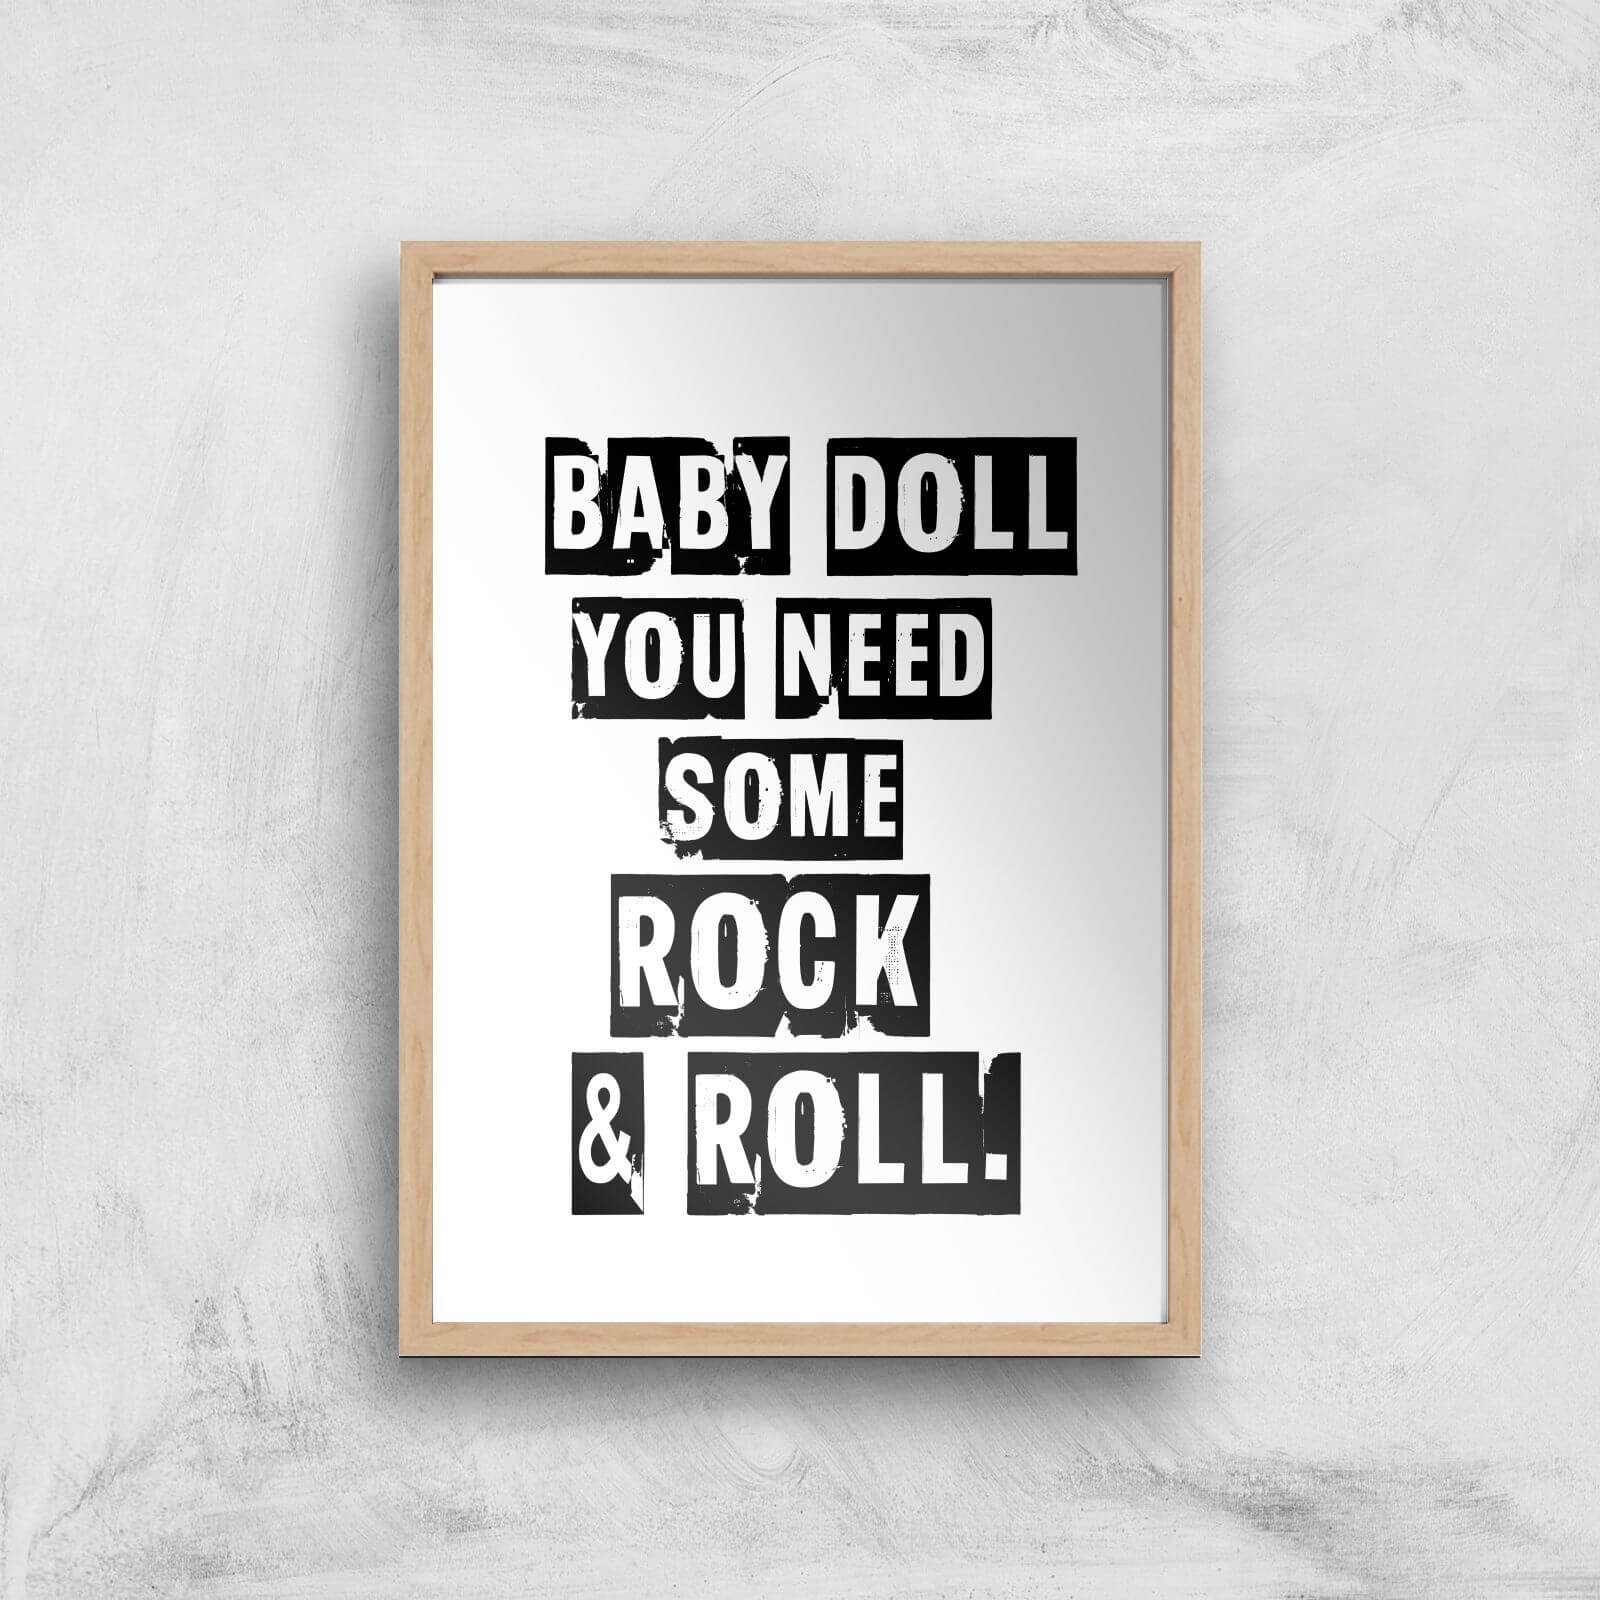 Baby Doll You Need Some Rock & Roll Giclee Art Print - A2 - Wooden Frame